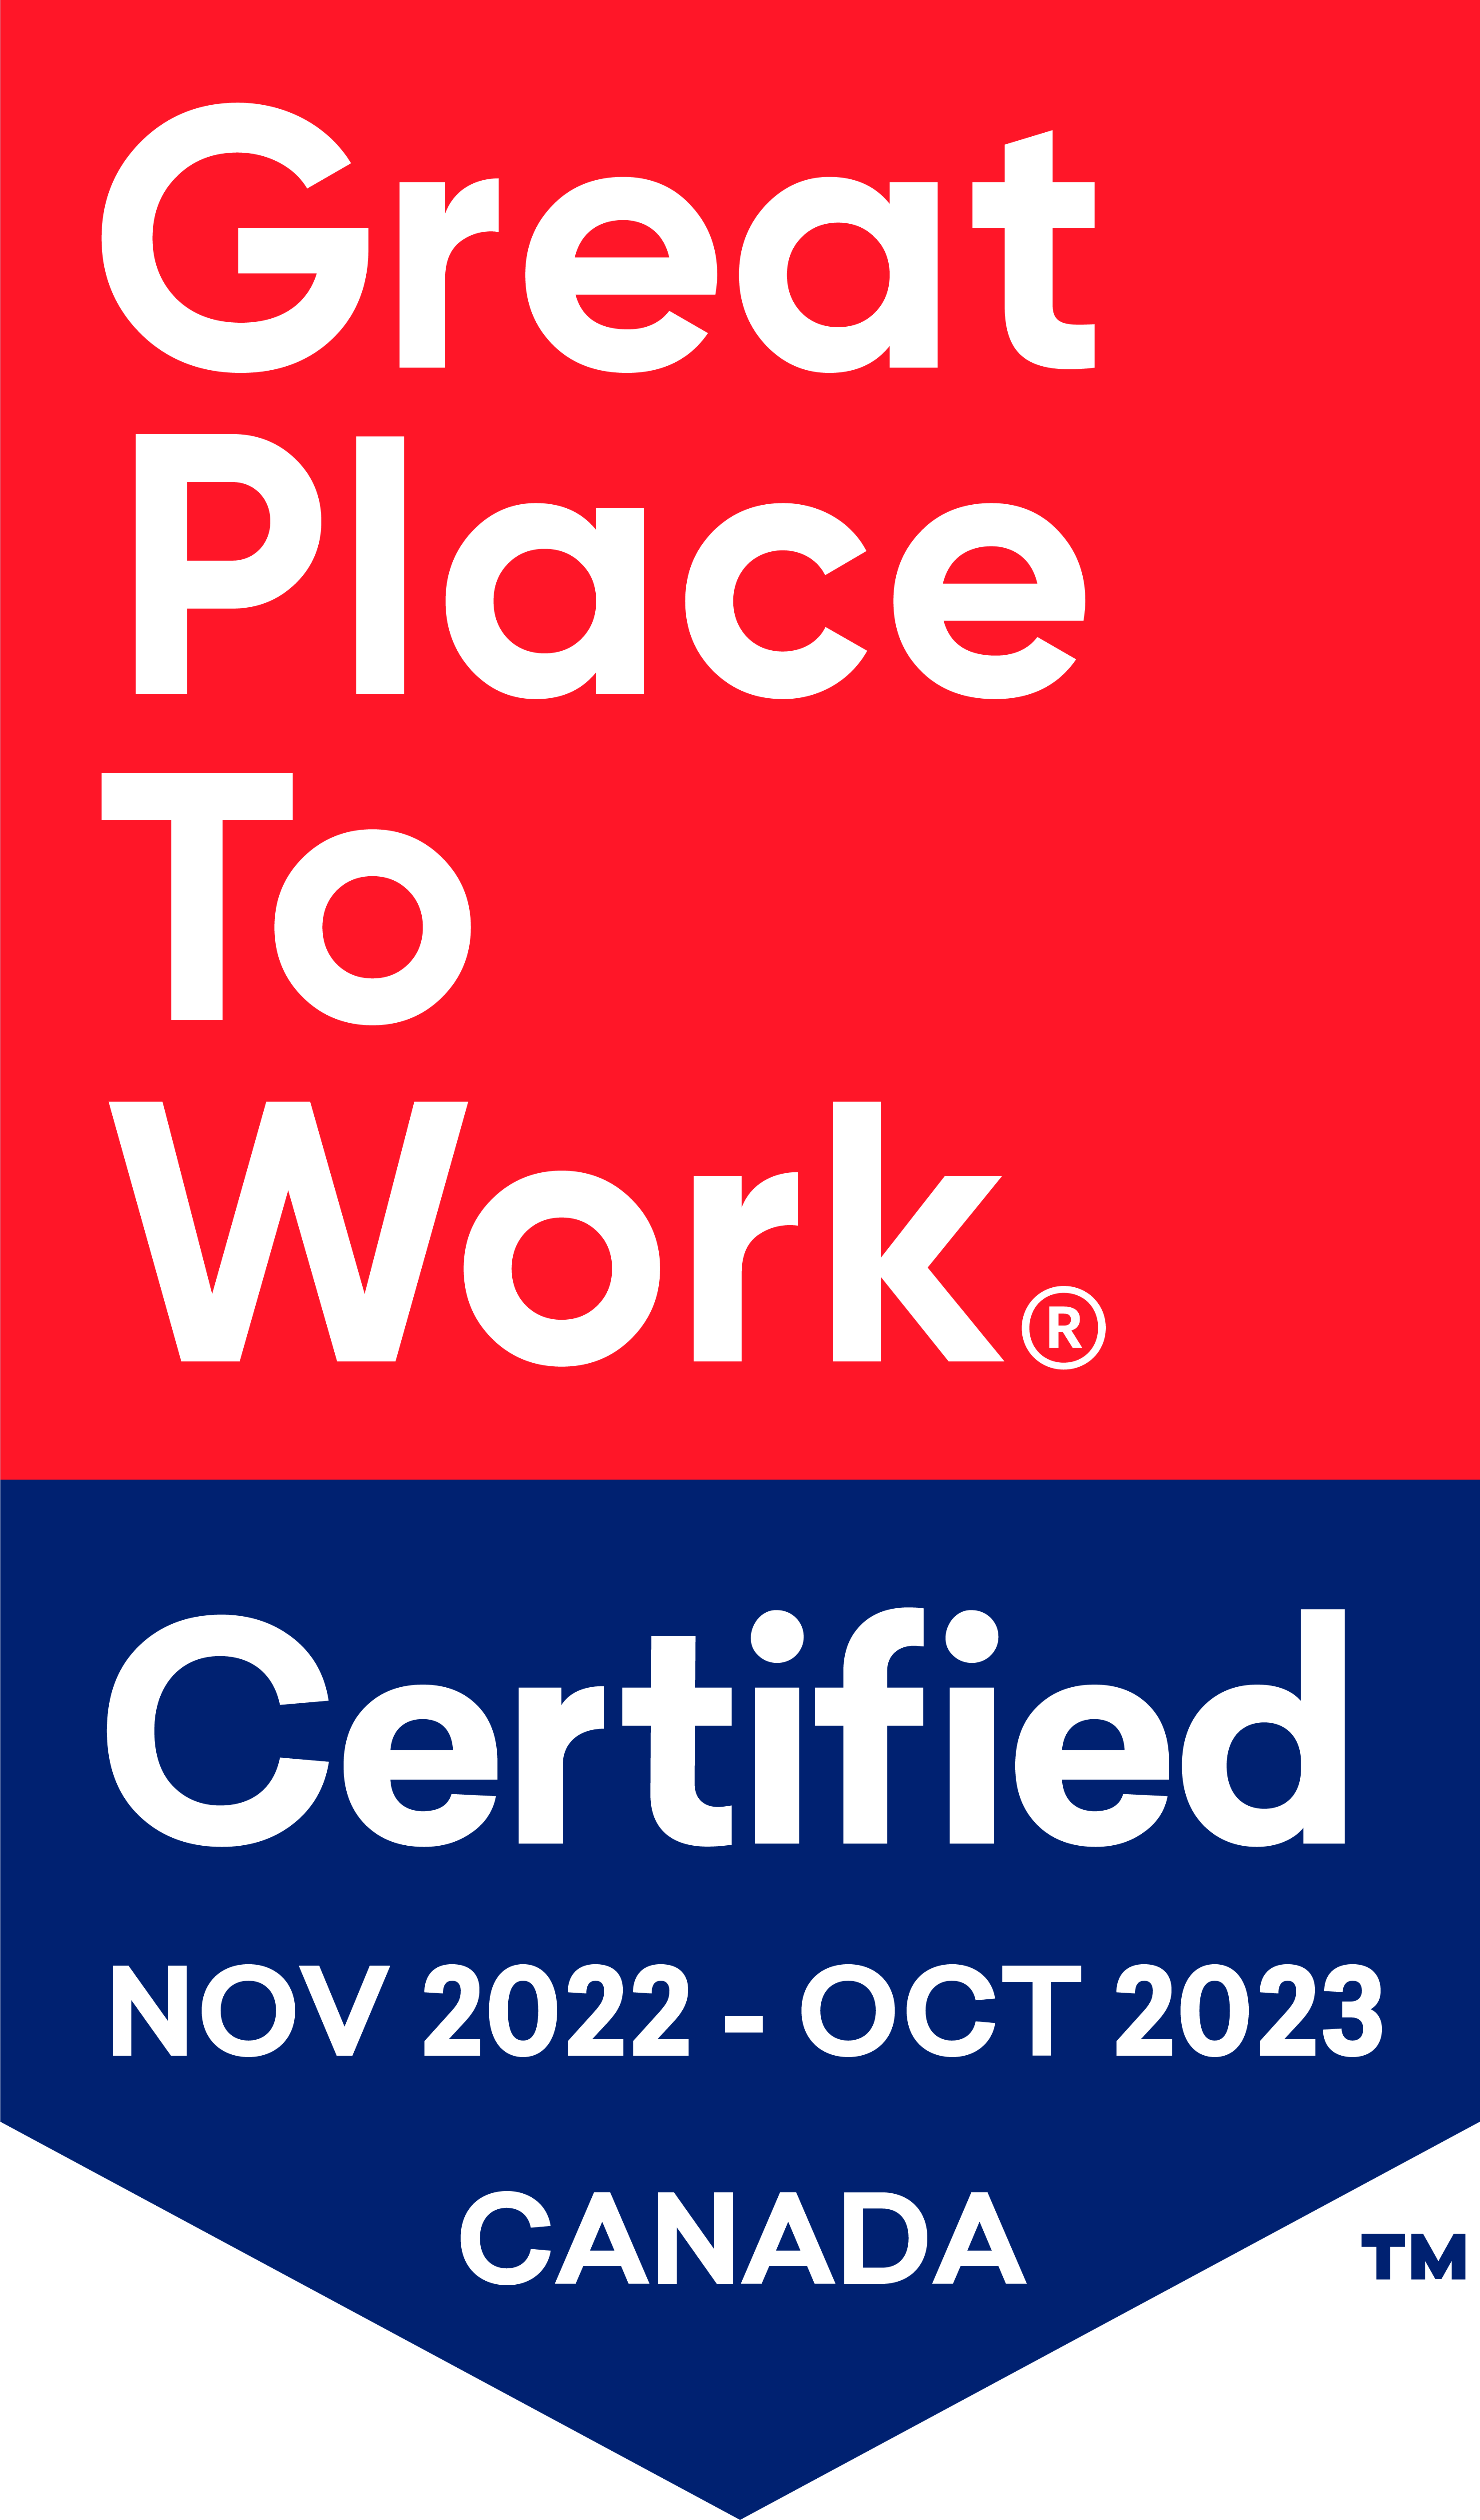 Great Place to Work Certification 2022-2023 Canada